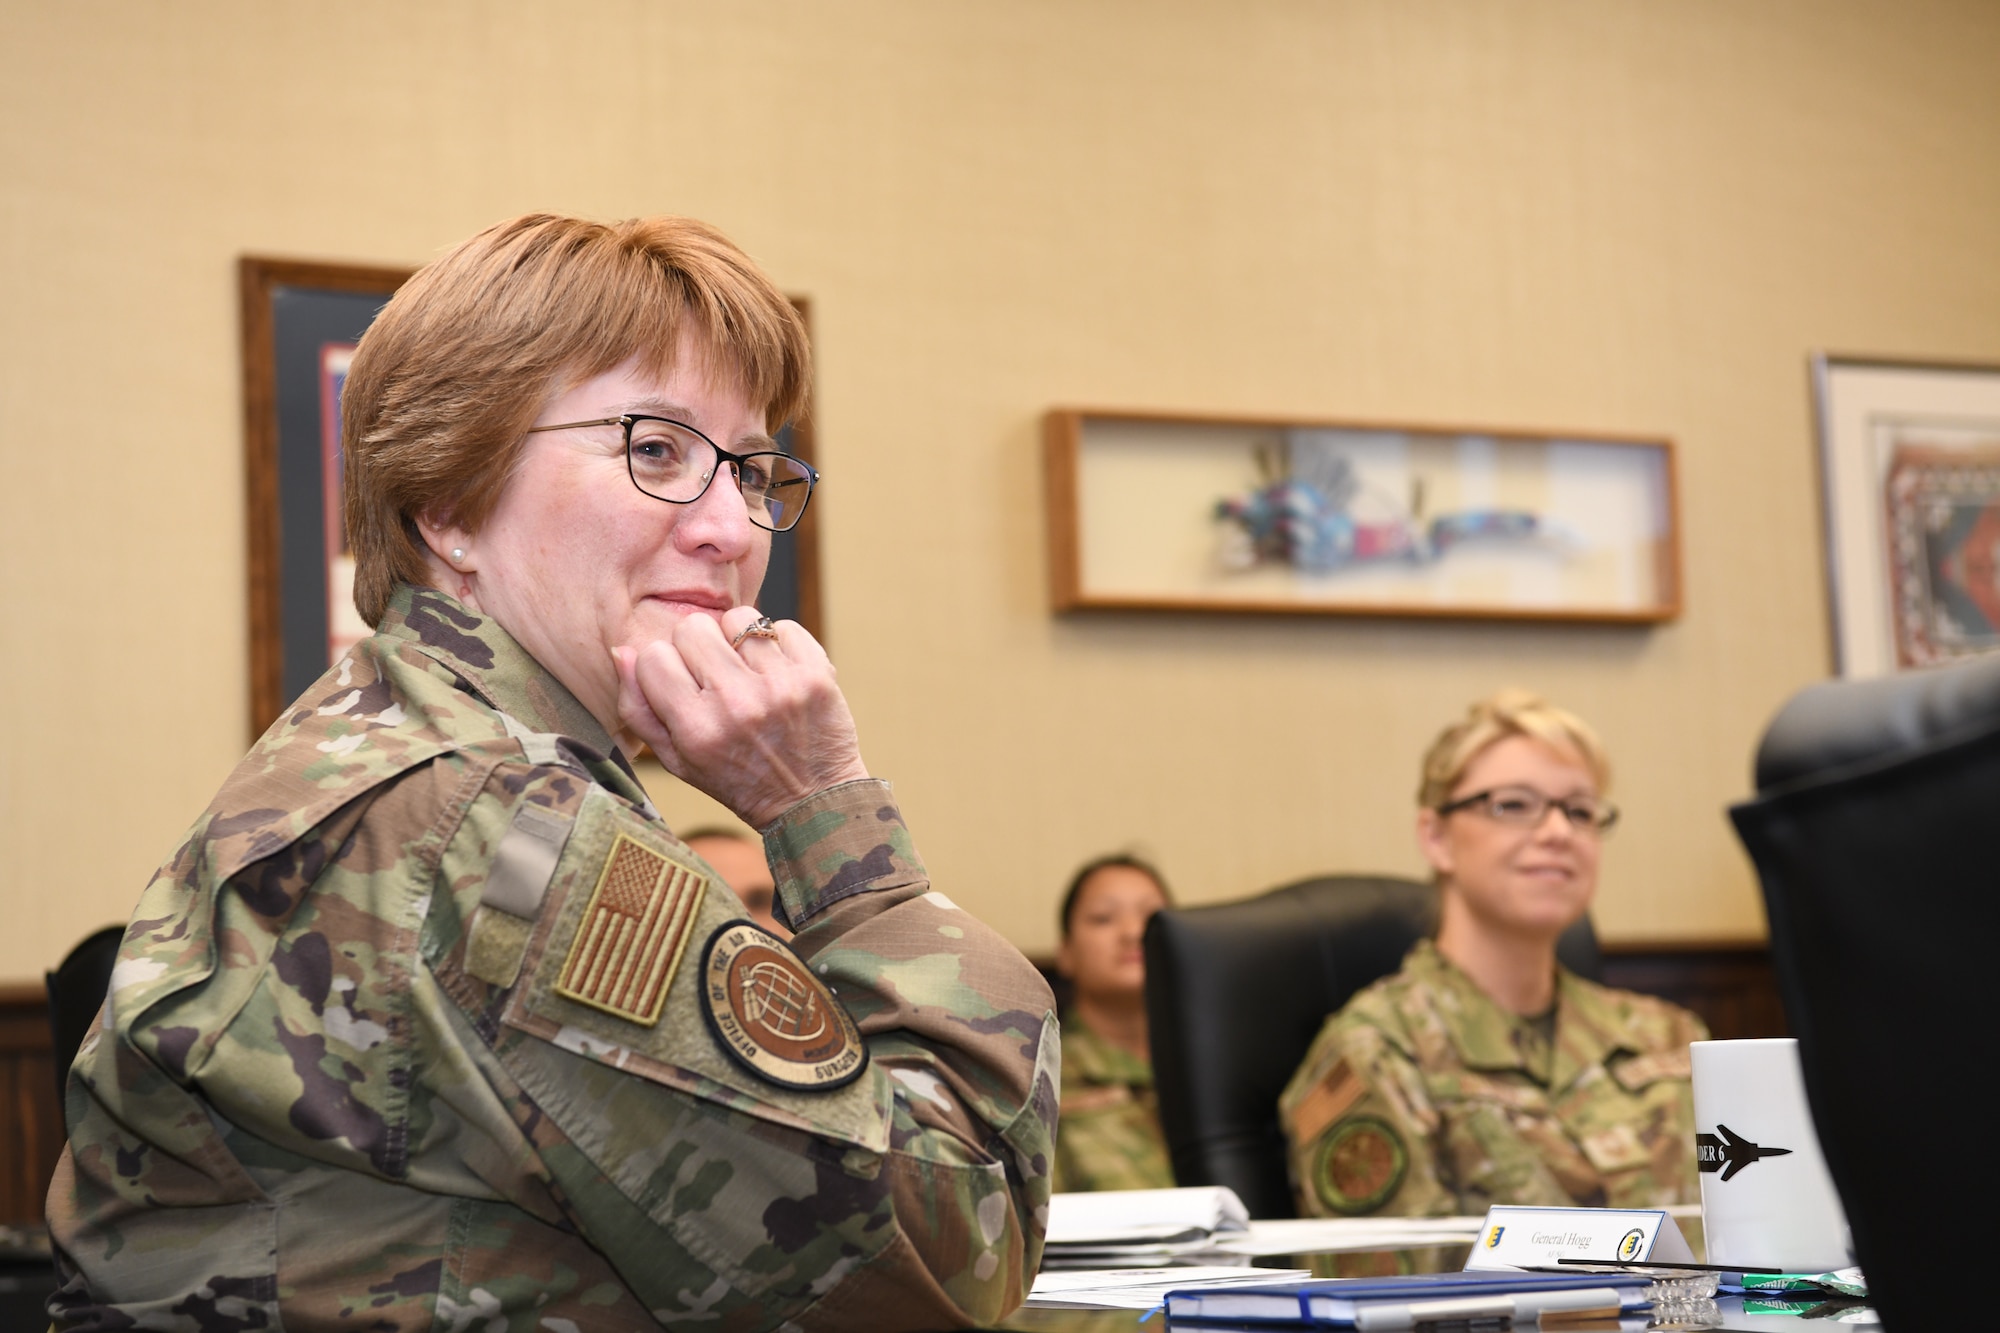 Lt. Gen. Dorothy Hogg, Air Force Surgeon General, receives a 28th Bomb Wing mission brief at Ellsworth Air Force Base, South Dakota, Jan. 30, 2020. The Air Force Surgeon General is responsible for developing plans, programs and procedures in support of worldwide Air Force operations. (U.S. Air Force photo by Senior Airman Nicolas Z. Erwin)